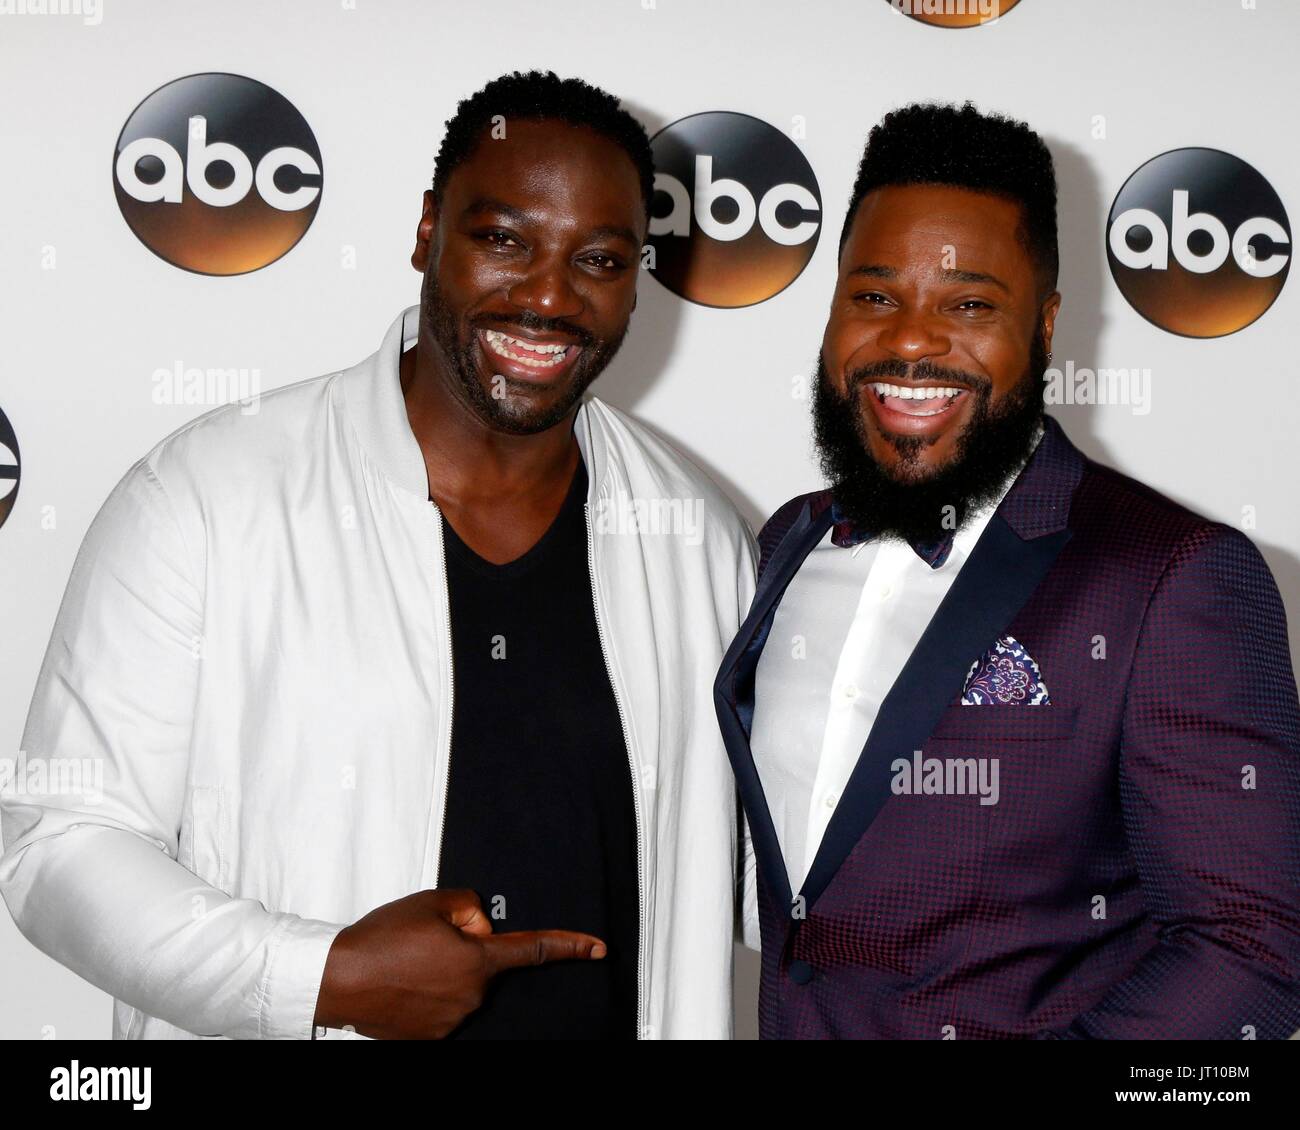 Beverly Hills, CA. 6th Aug, 2017. Adewale Akinnuoye-Agbaje, Malcolm-Jamal Warner at arrivals for ABC's TCA Summer Press Tour Party, The Beverly Hilton Hotel, Beverly Hills, CA August 6, 2017. Credit: Priscilla Grant/Everett Collection/Alamy Live News Stock Photo